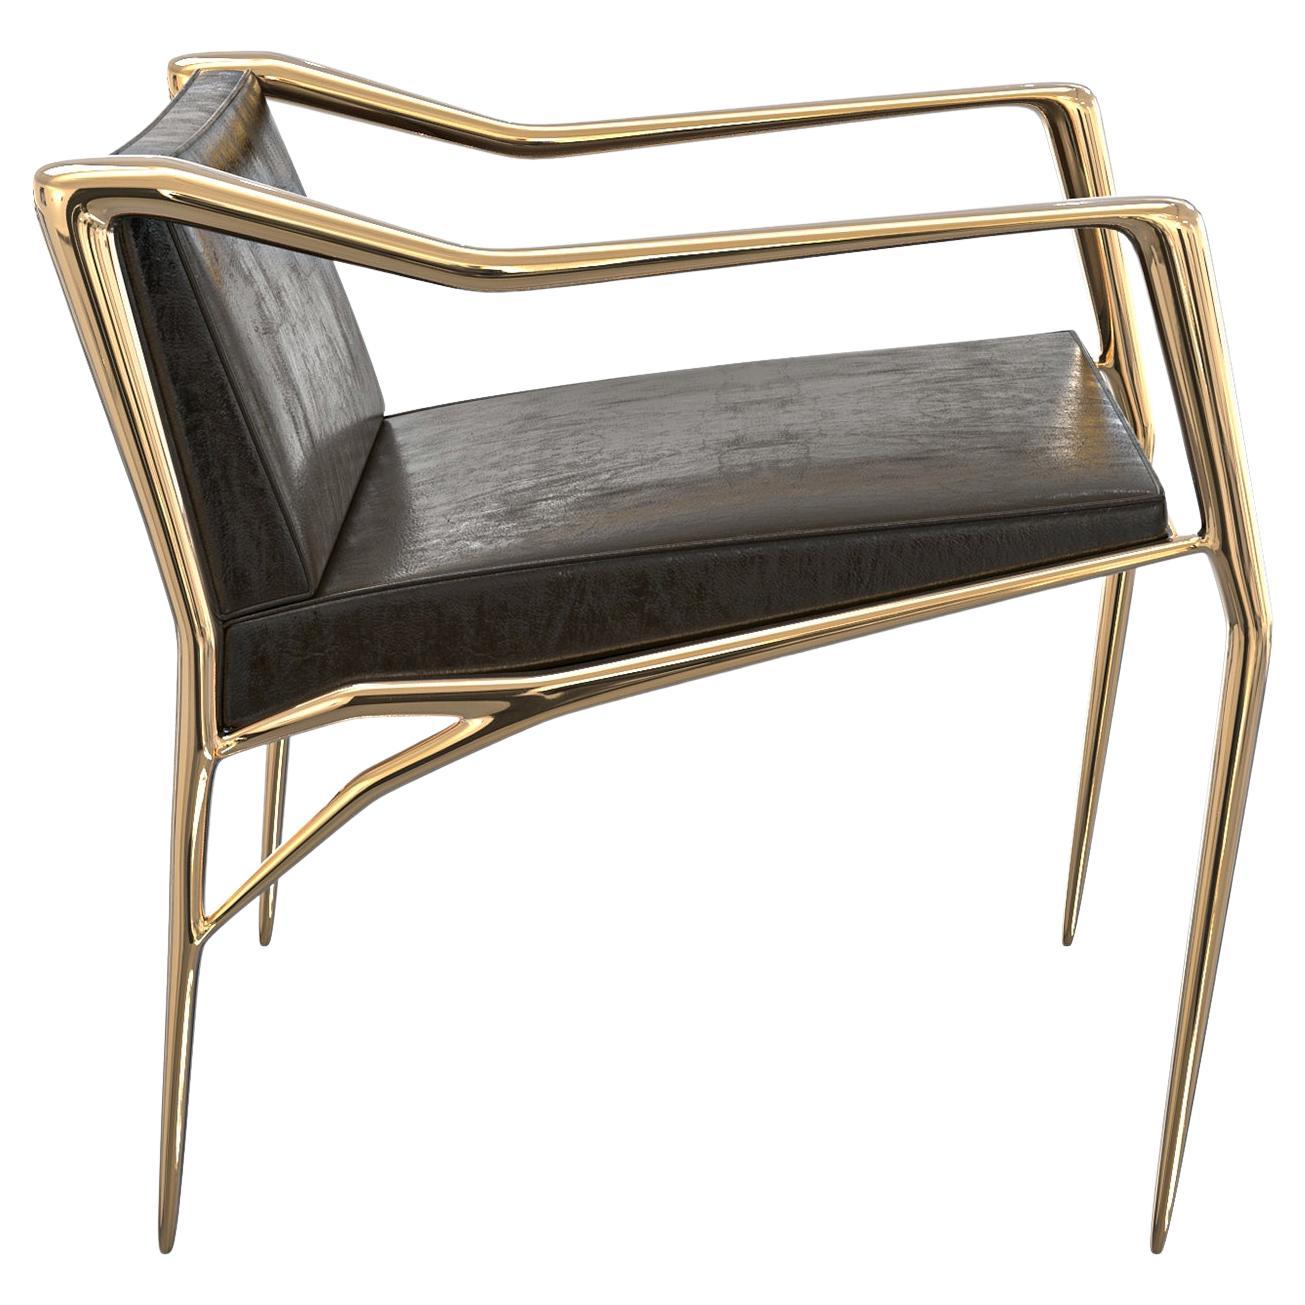 "Inizio" Dining Room Chair with Bronze and Tailor Made Leather